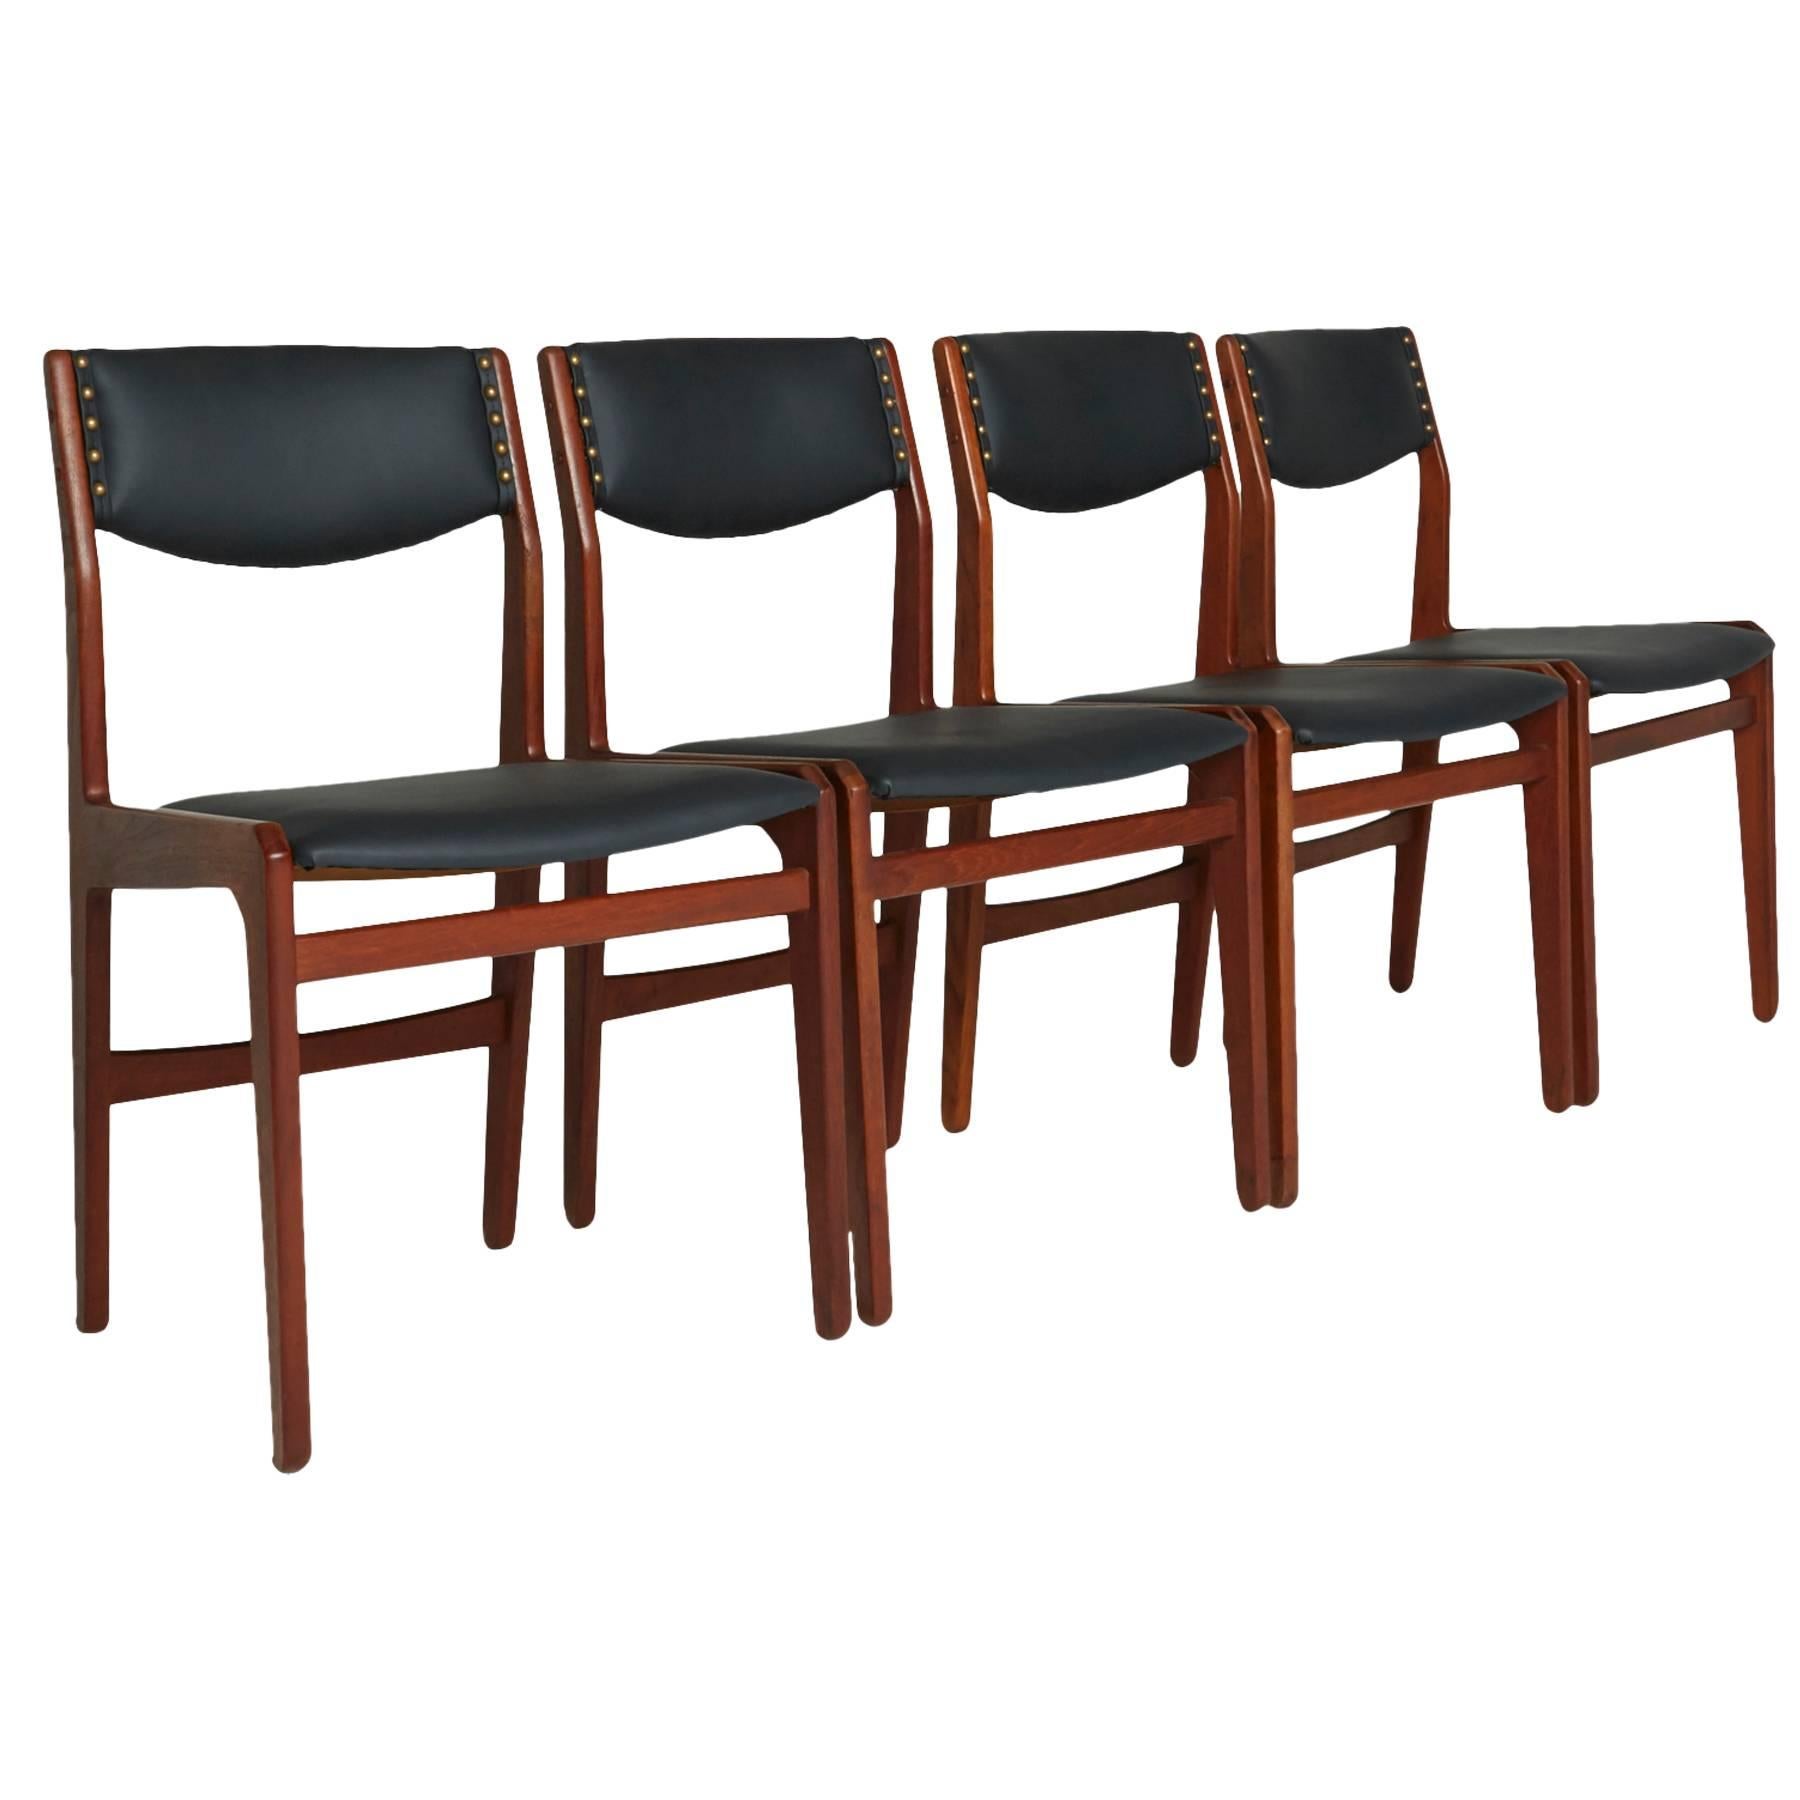 Set of Four Danish Modern Dining Chairs by Illums Bolighus